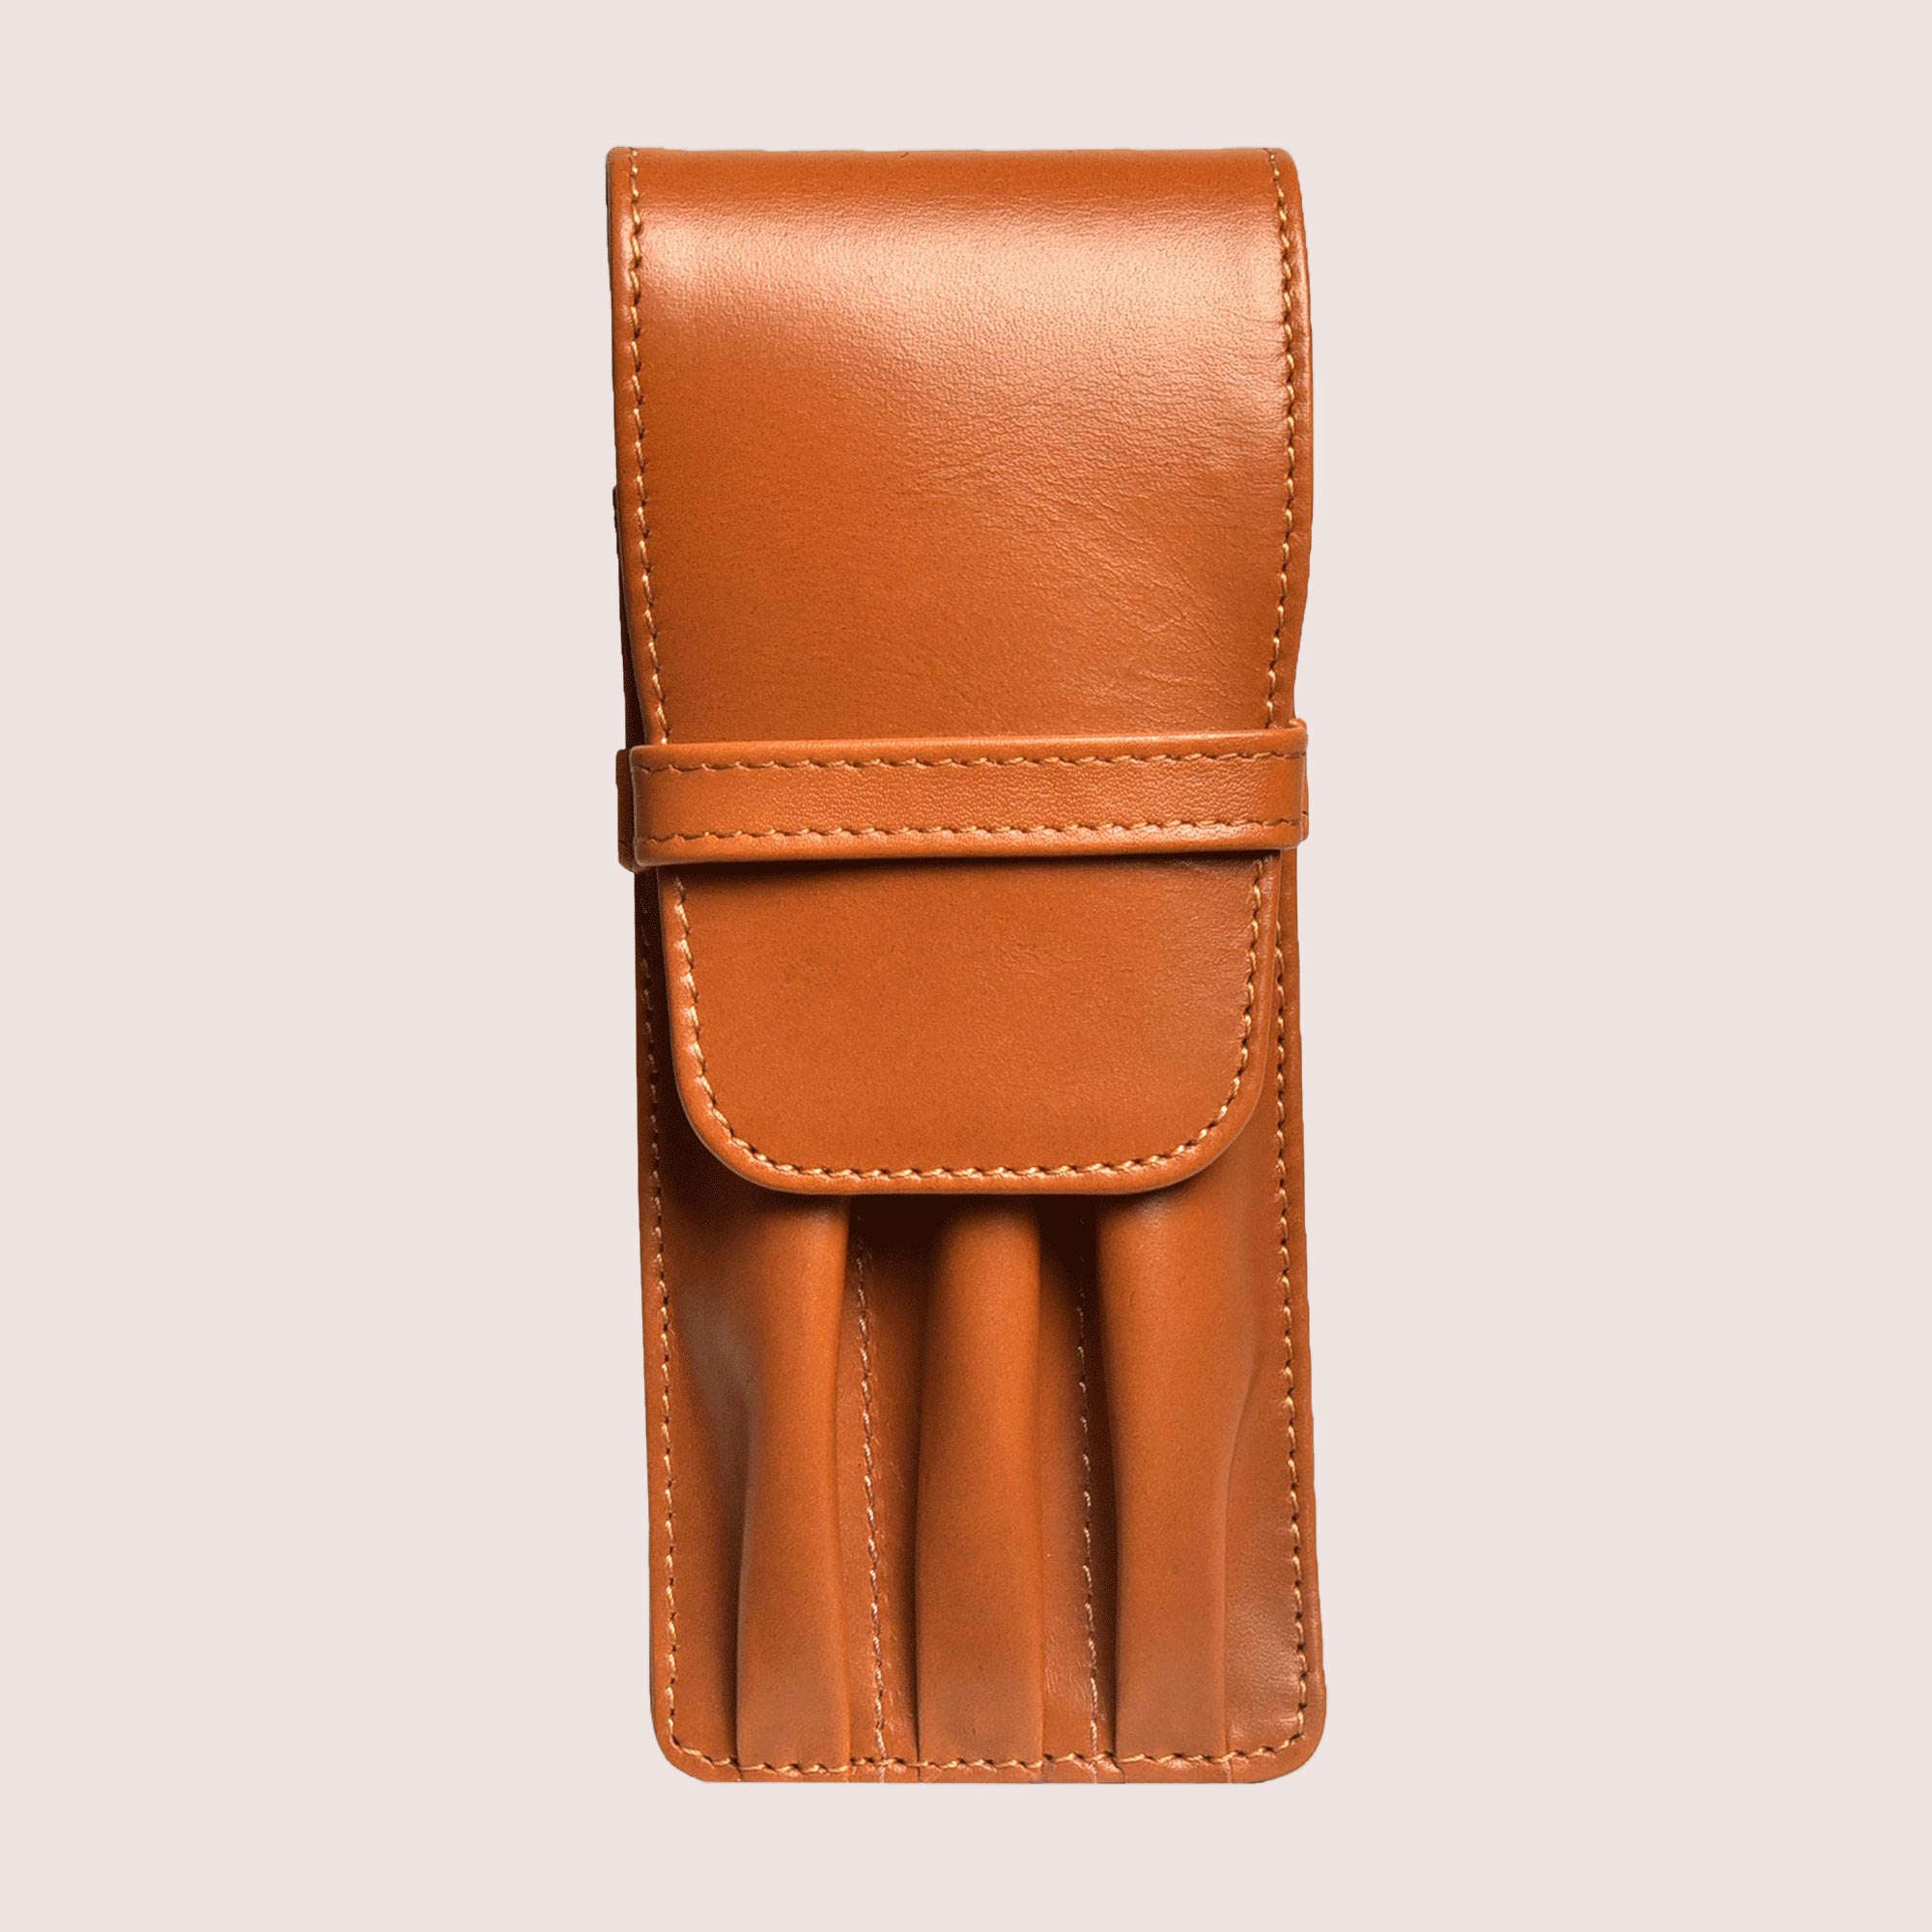 leather pen holster